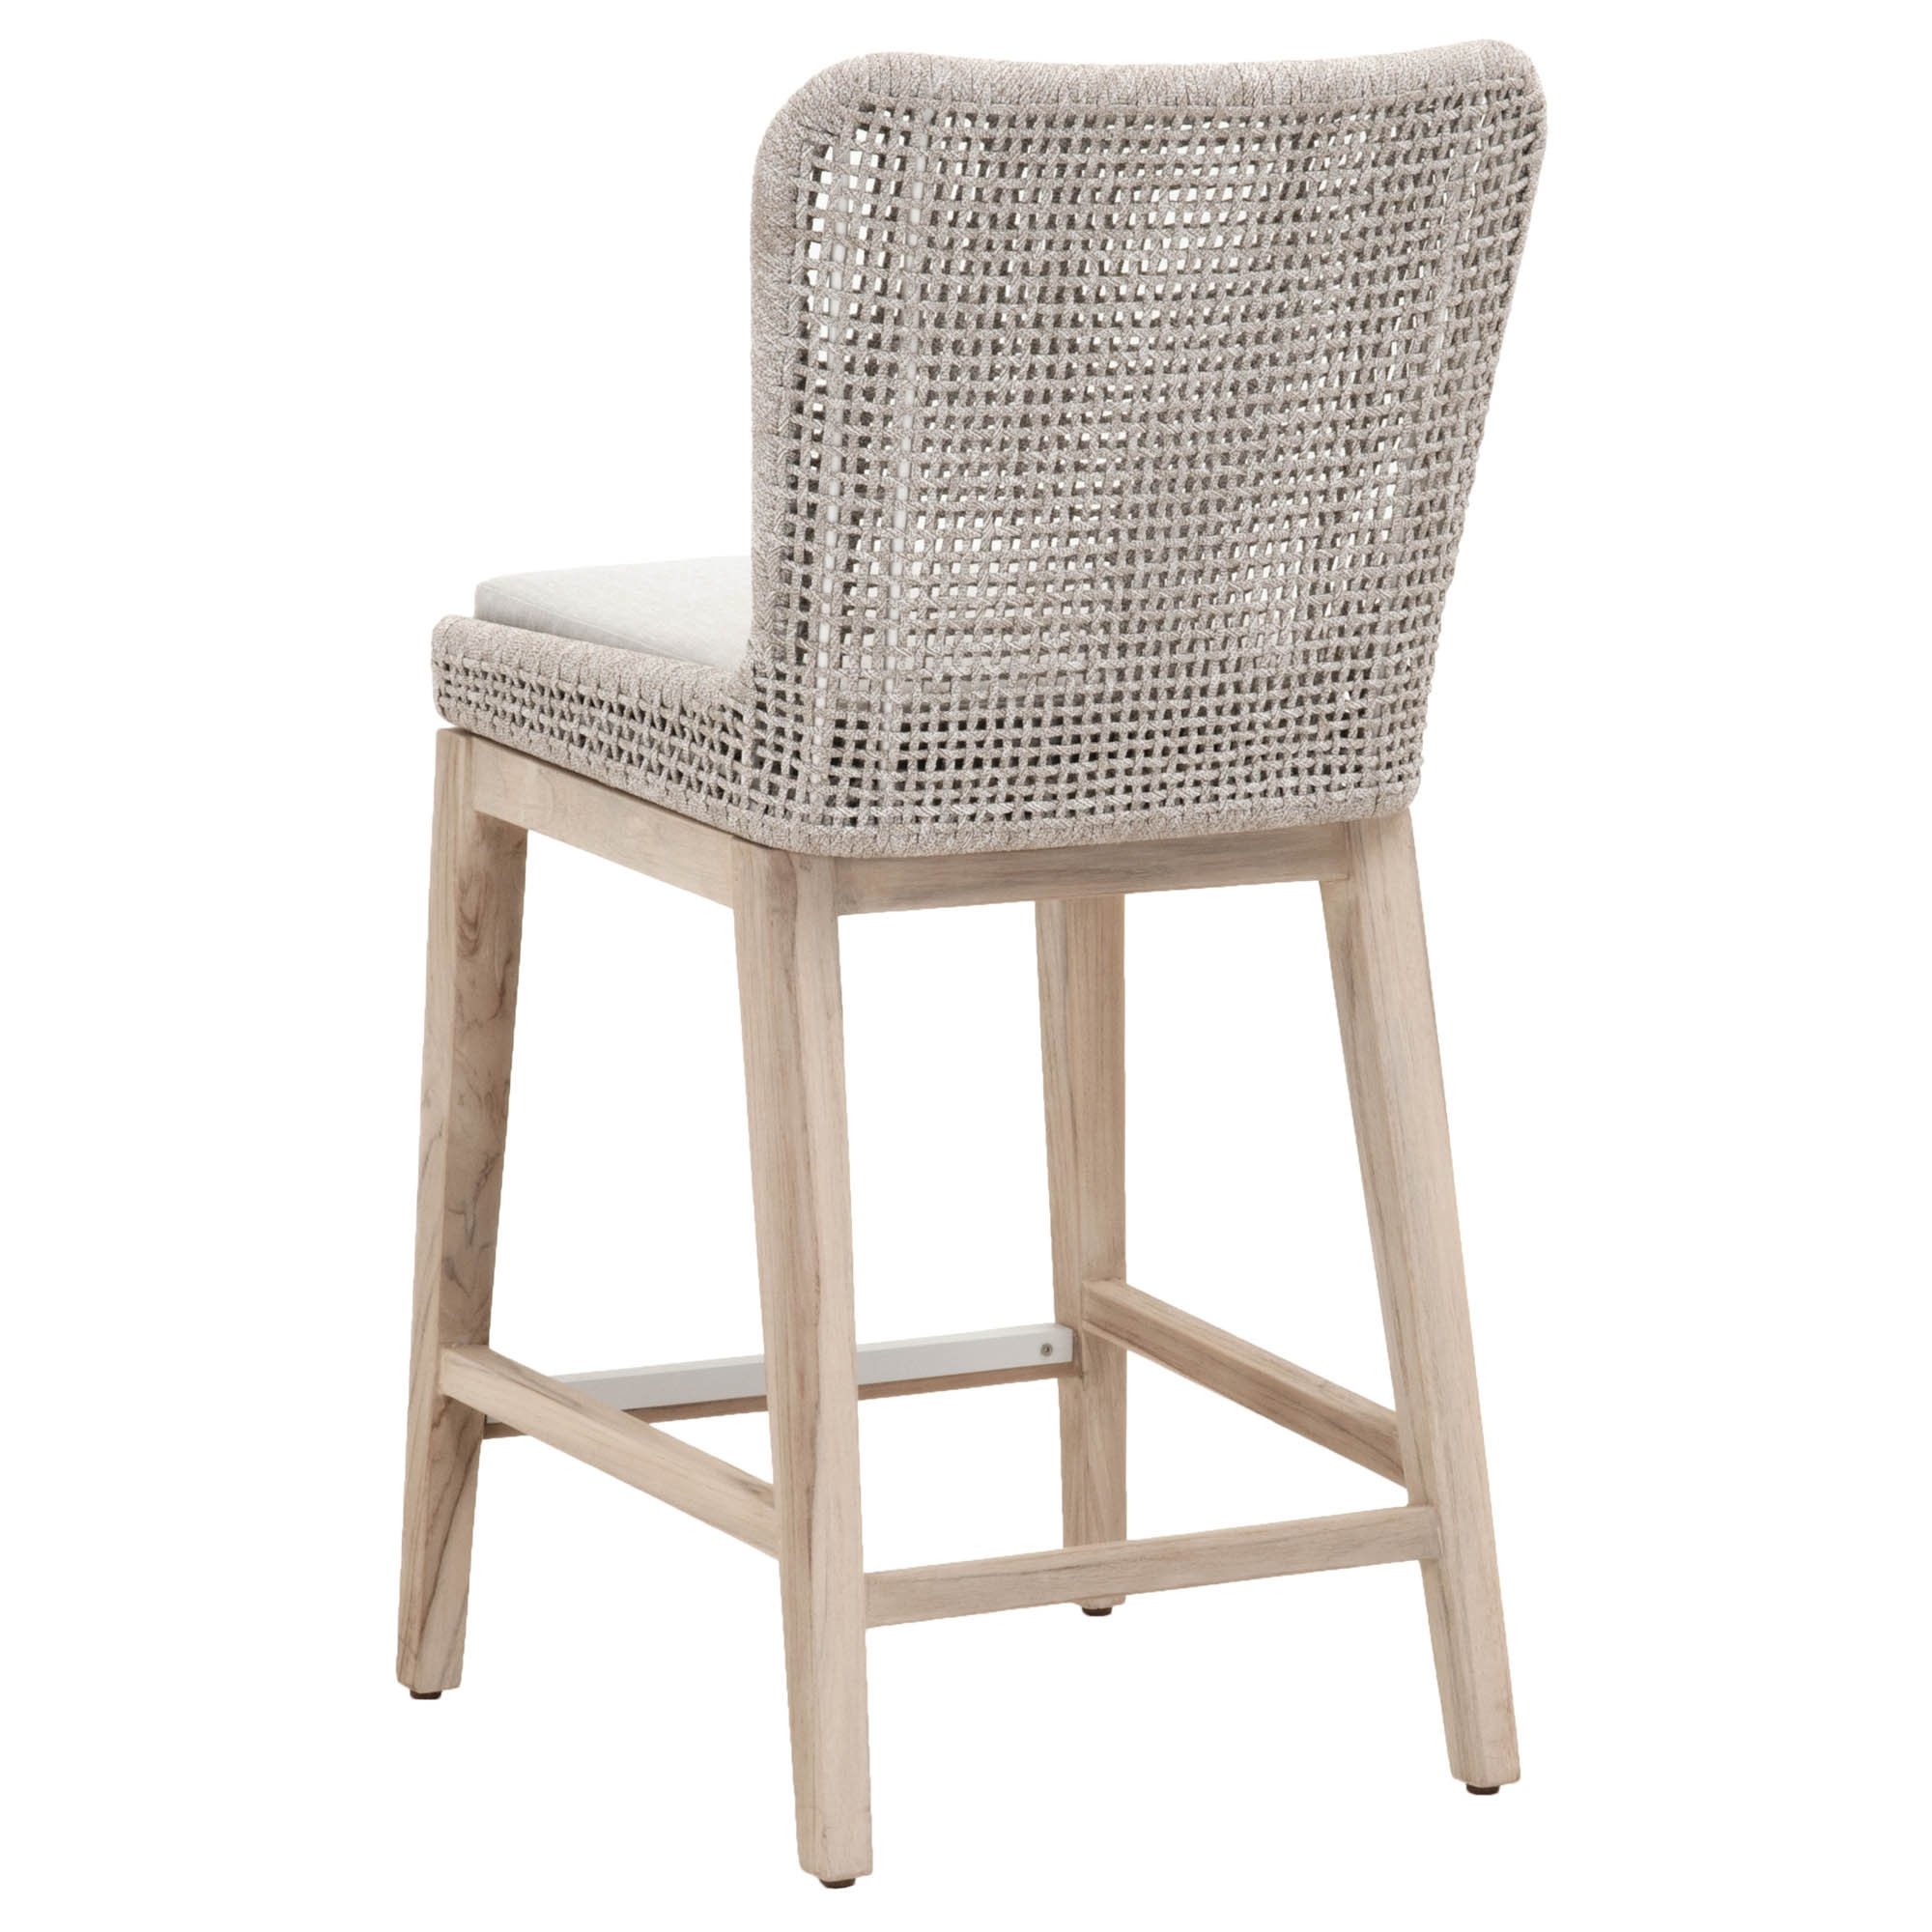 Winnetka Indoor/Outdoor Counter Stool, White Taupe - Image 3